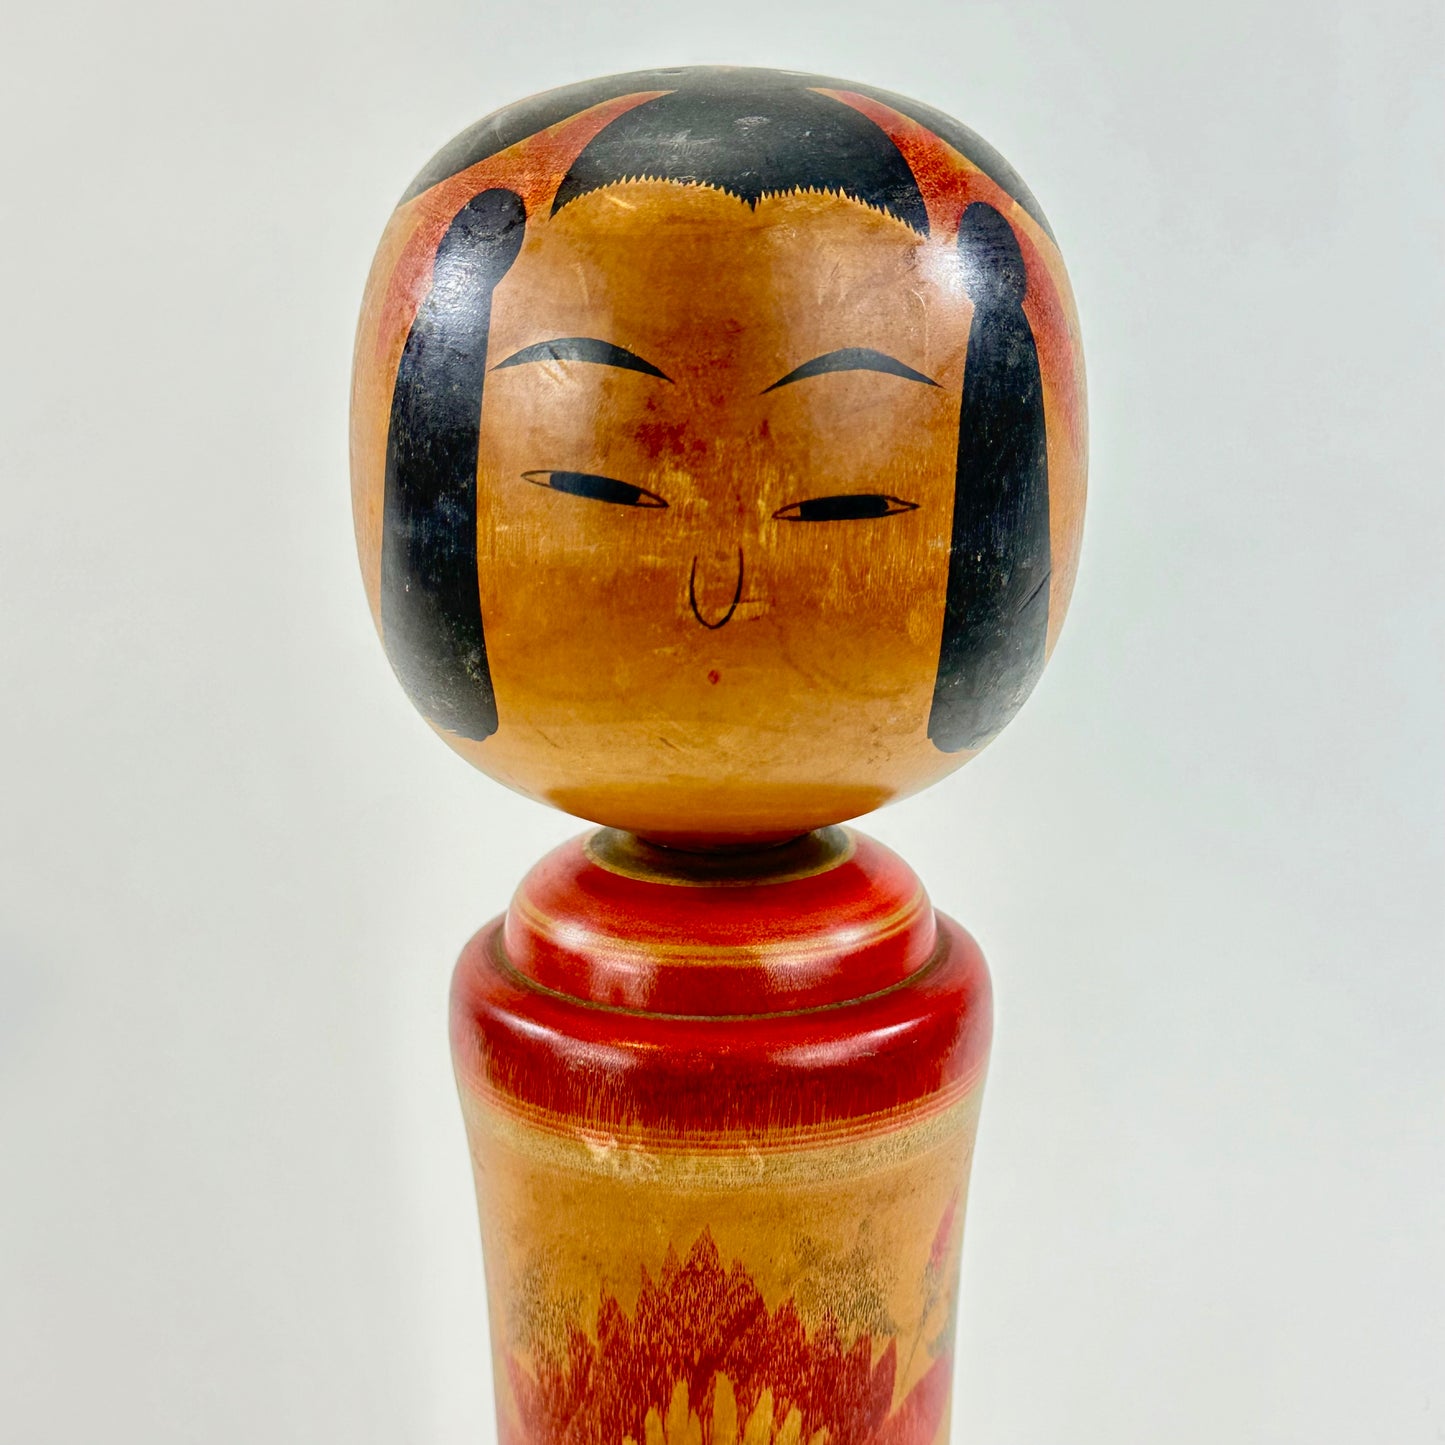 Vintage Japanese Kokeshi Doll Wooden Signed by Artist 12" Hand Painted